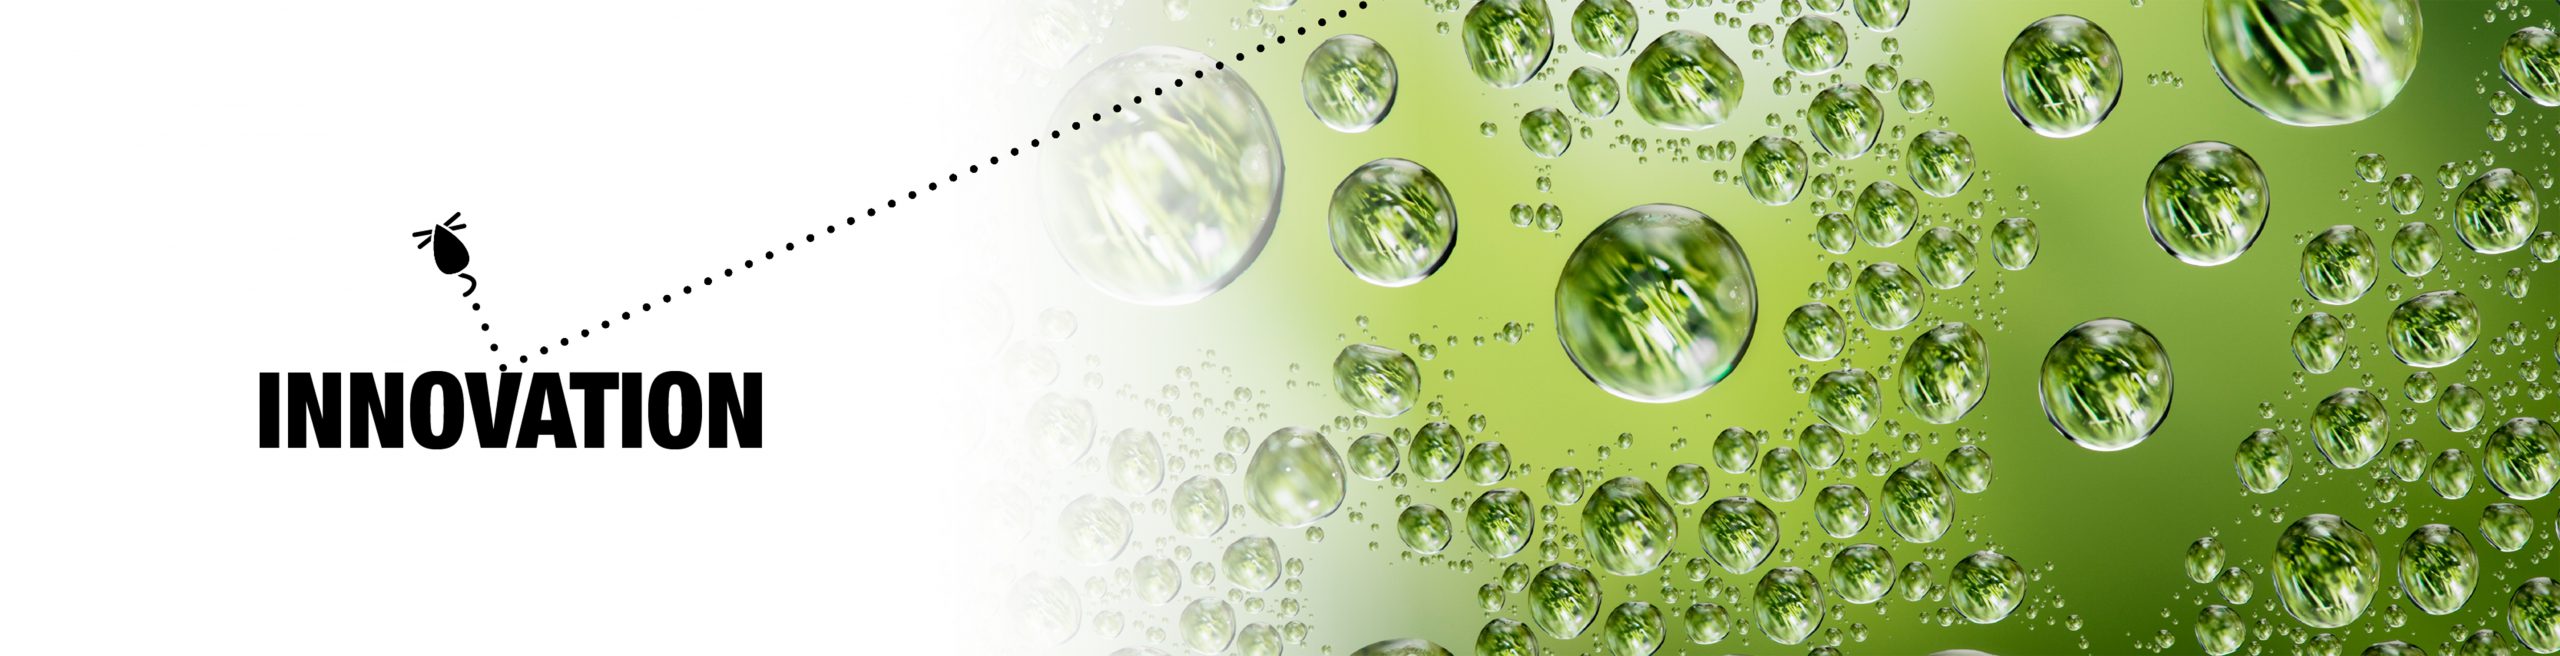 Header with image of droplets